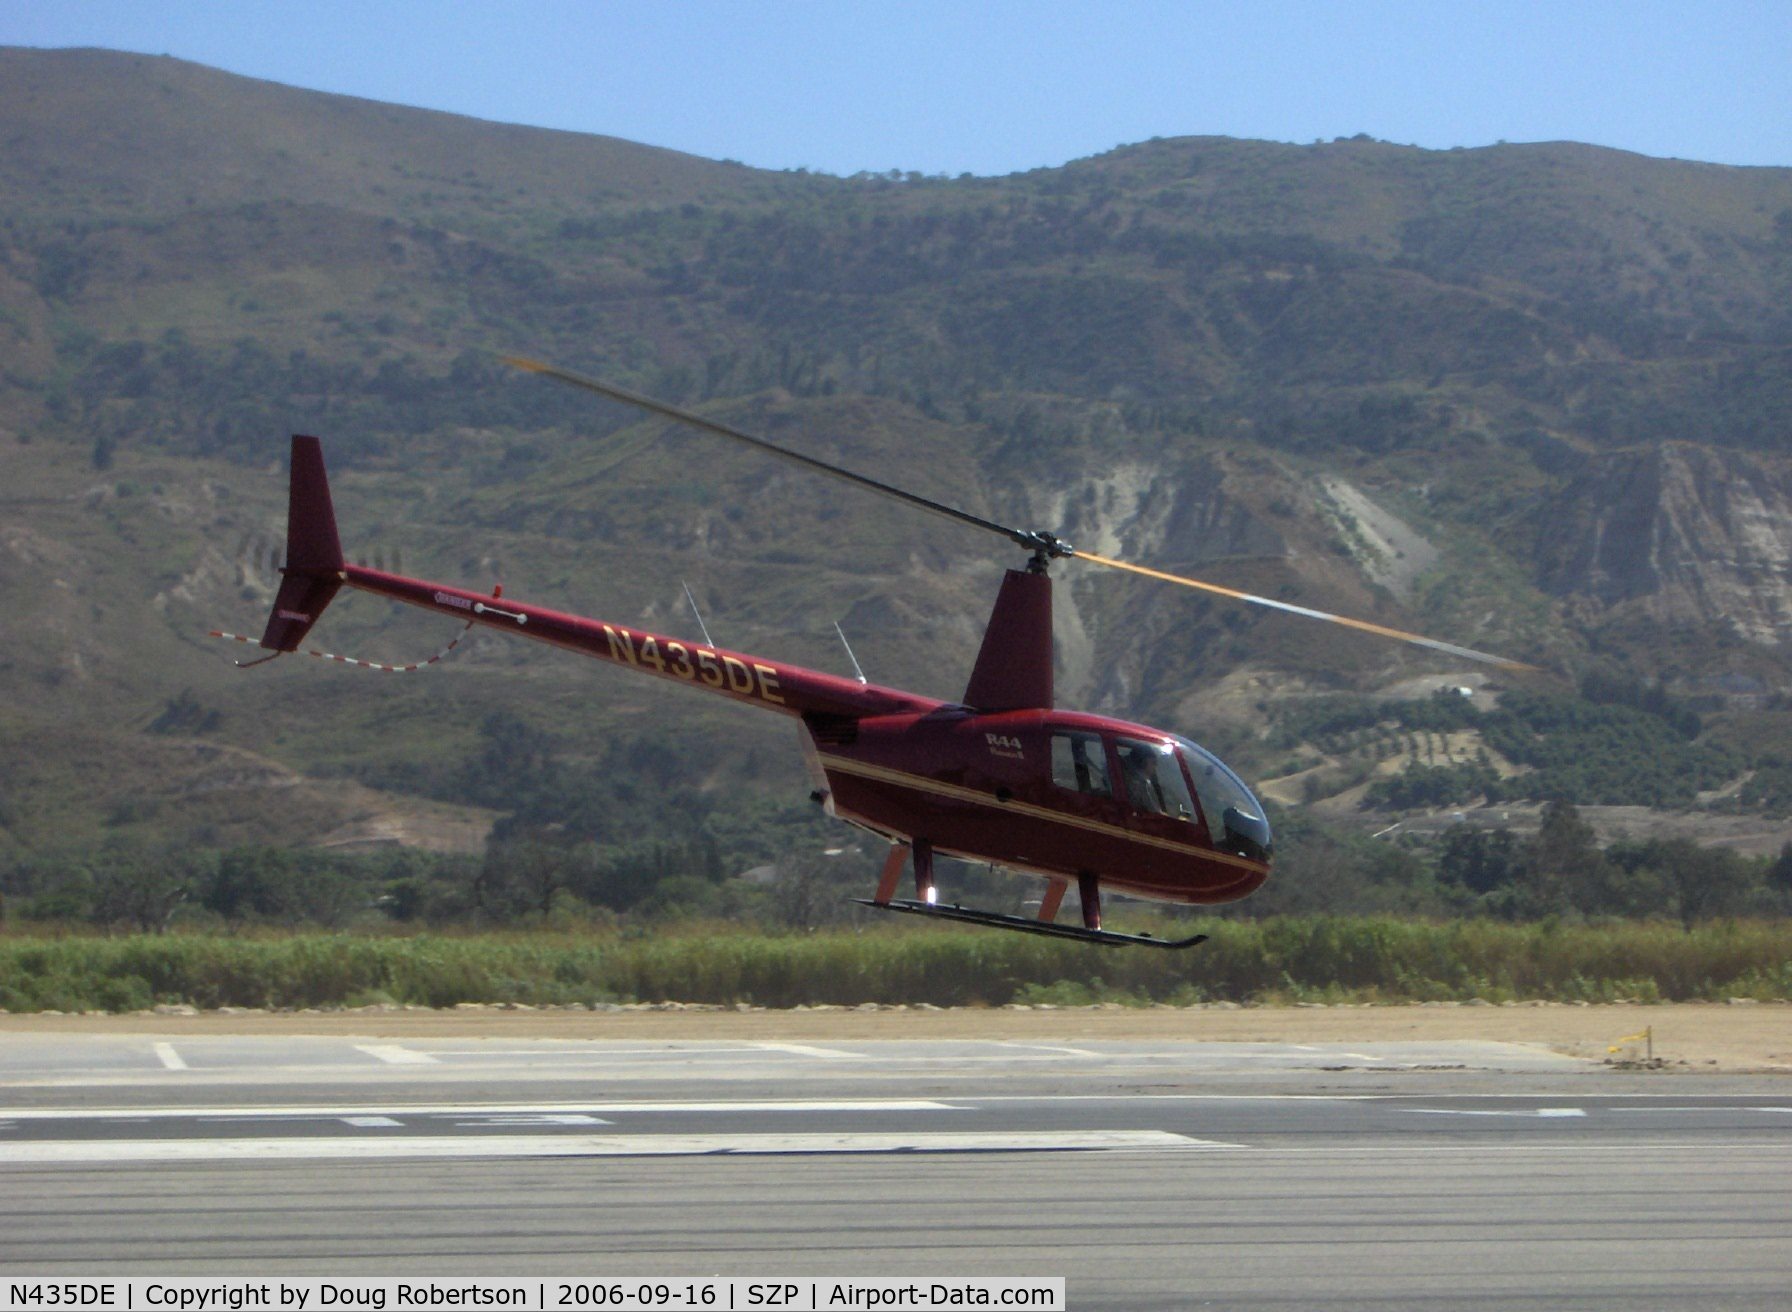 N435DE, 2005 Robinson R44 Raven II C/N 10605, 2005 Robinson R44 RAVEN II, Lycoming IO-540 derated to 245 Hp for takeoff 205 Hp continuous, departure Runway 22